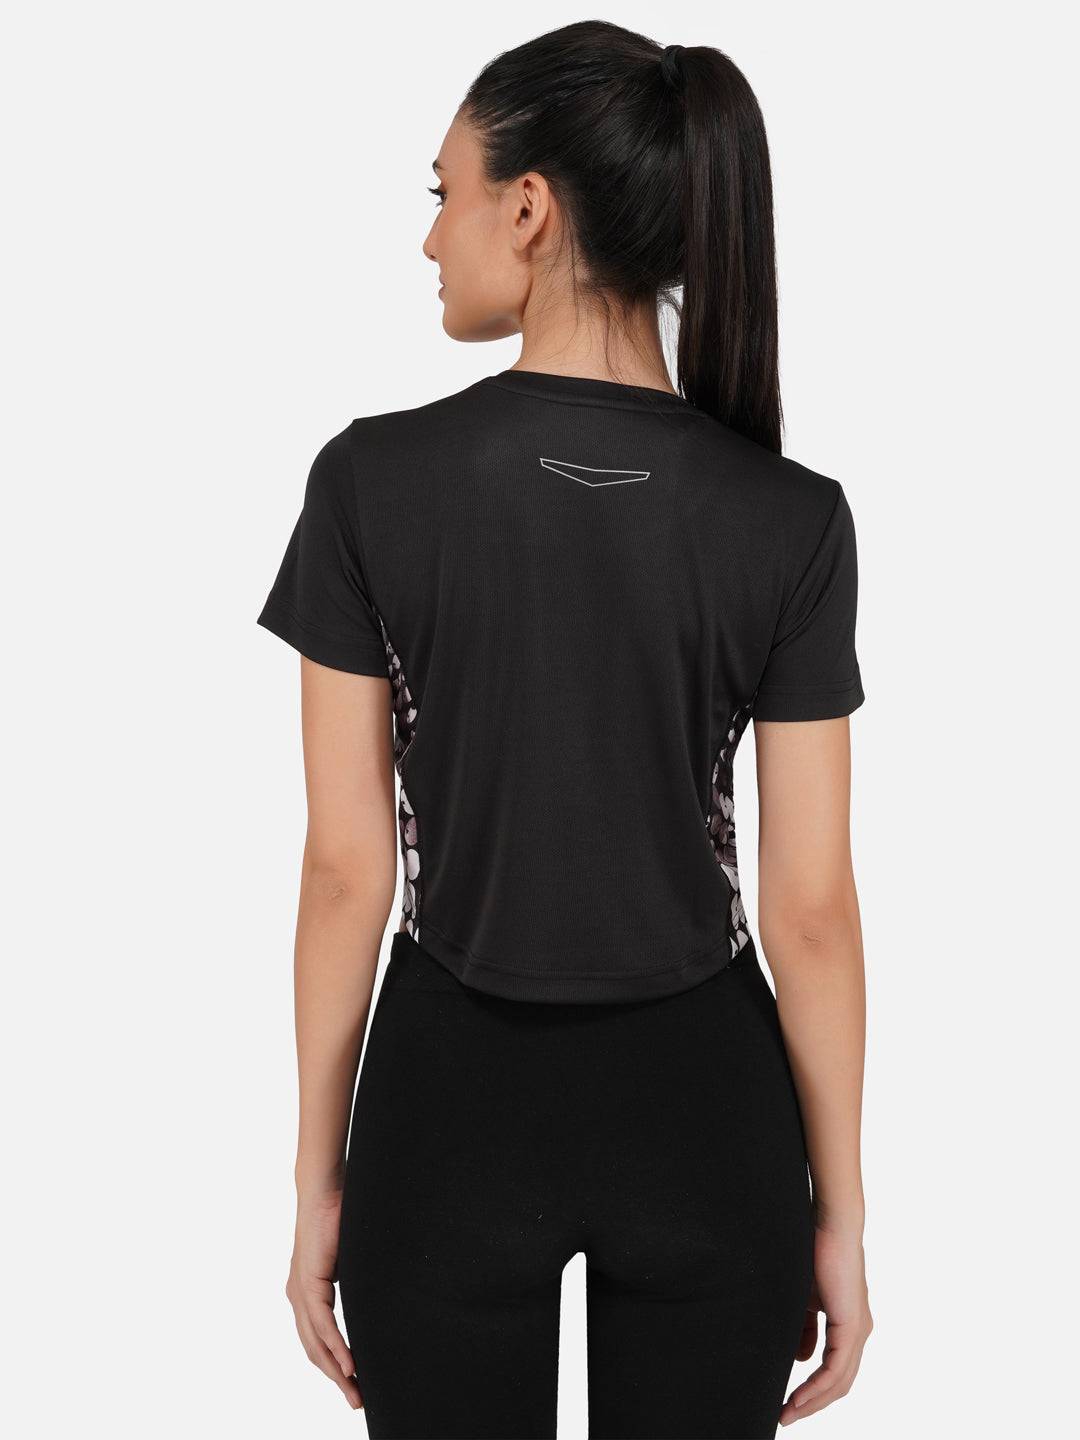 LONG BACK CROP TOP  BLACK AND REFLECTIVE RWW2027